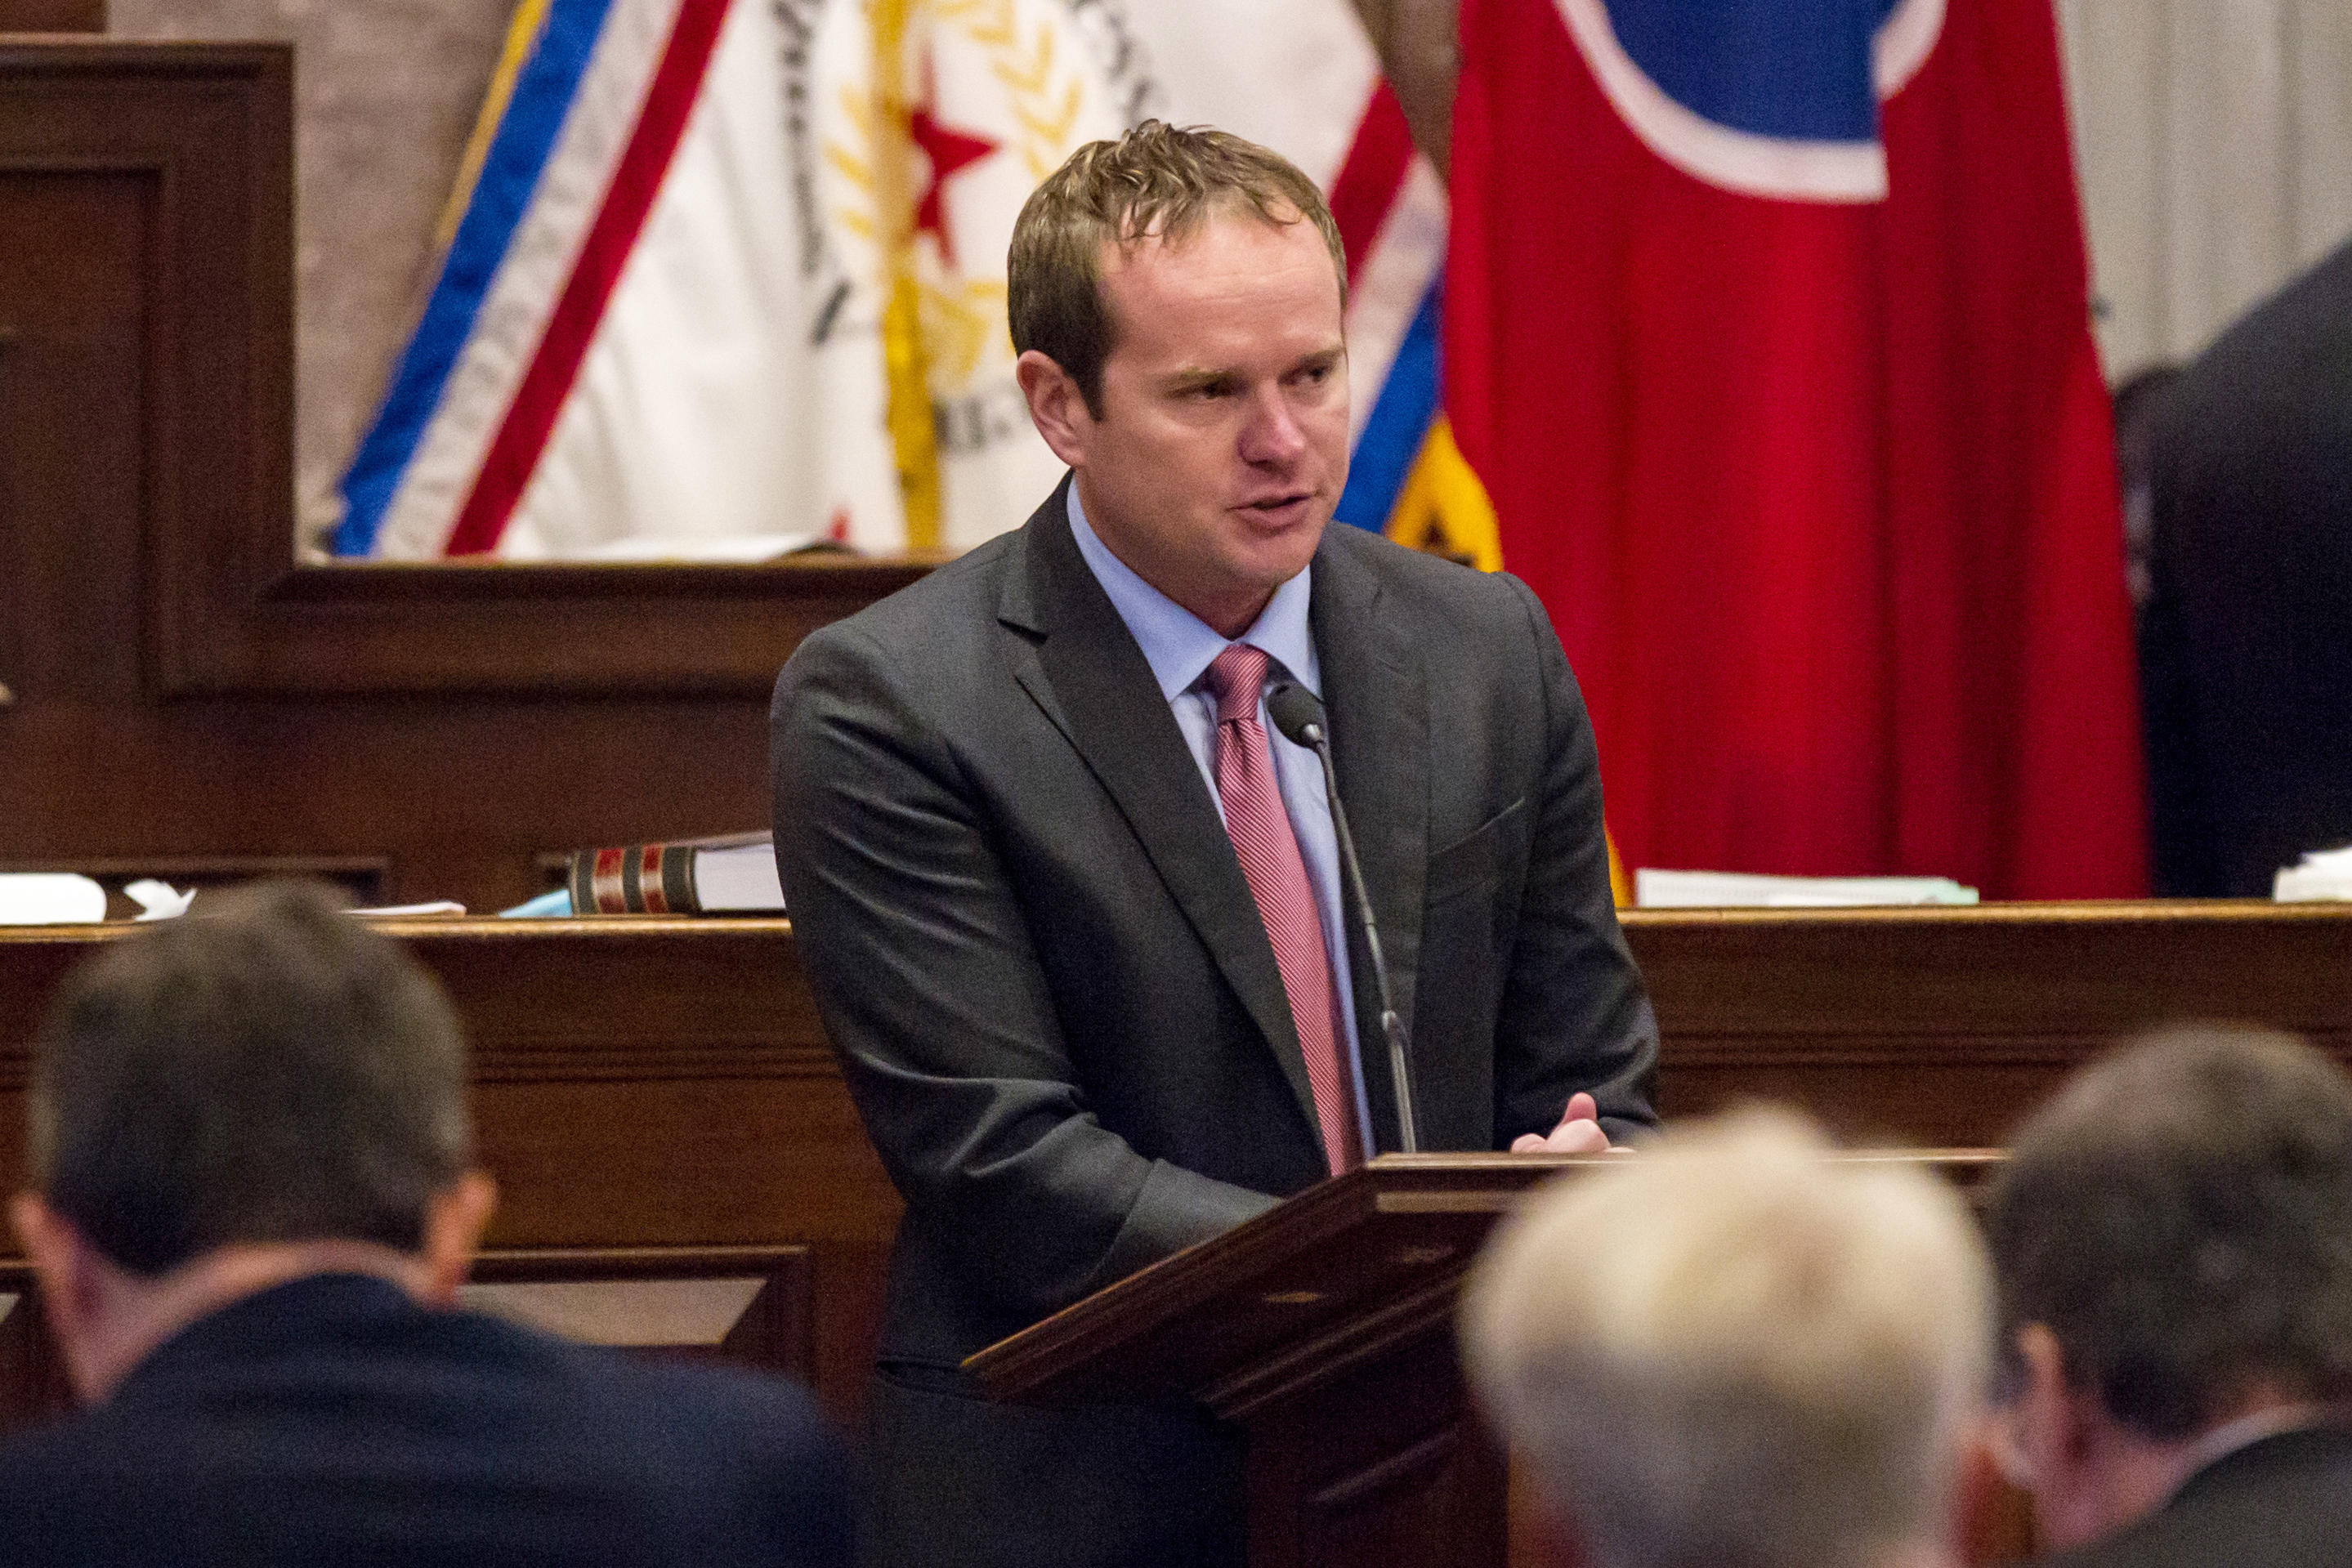 Tennessee House expels GOP lawmaker accused in sexual harassment cases